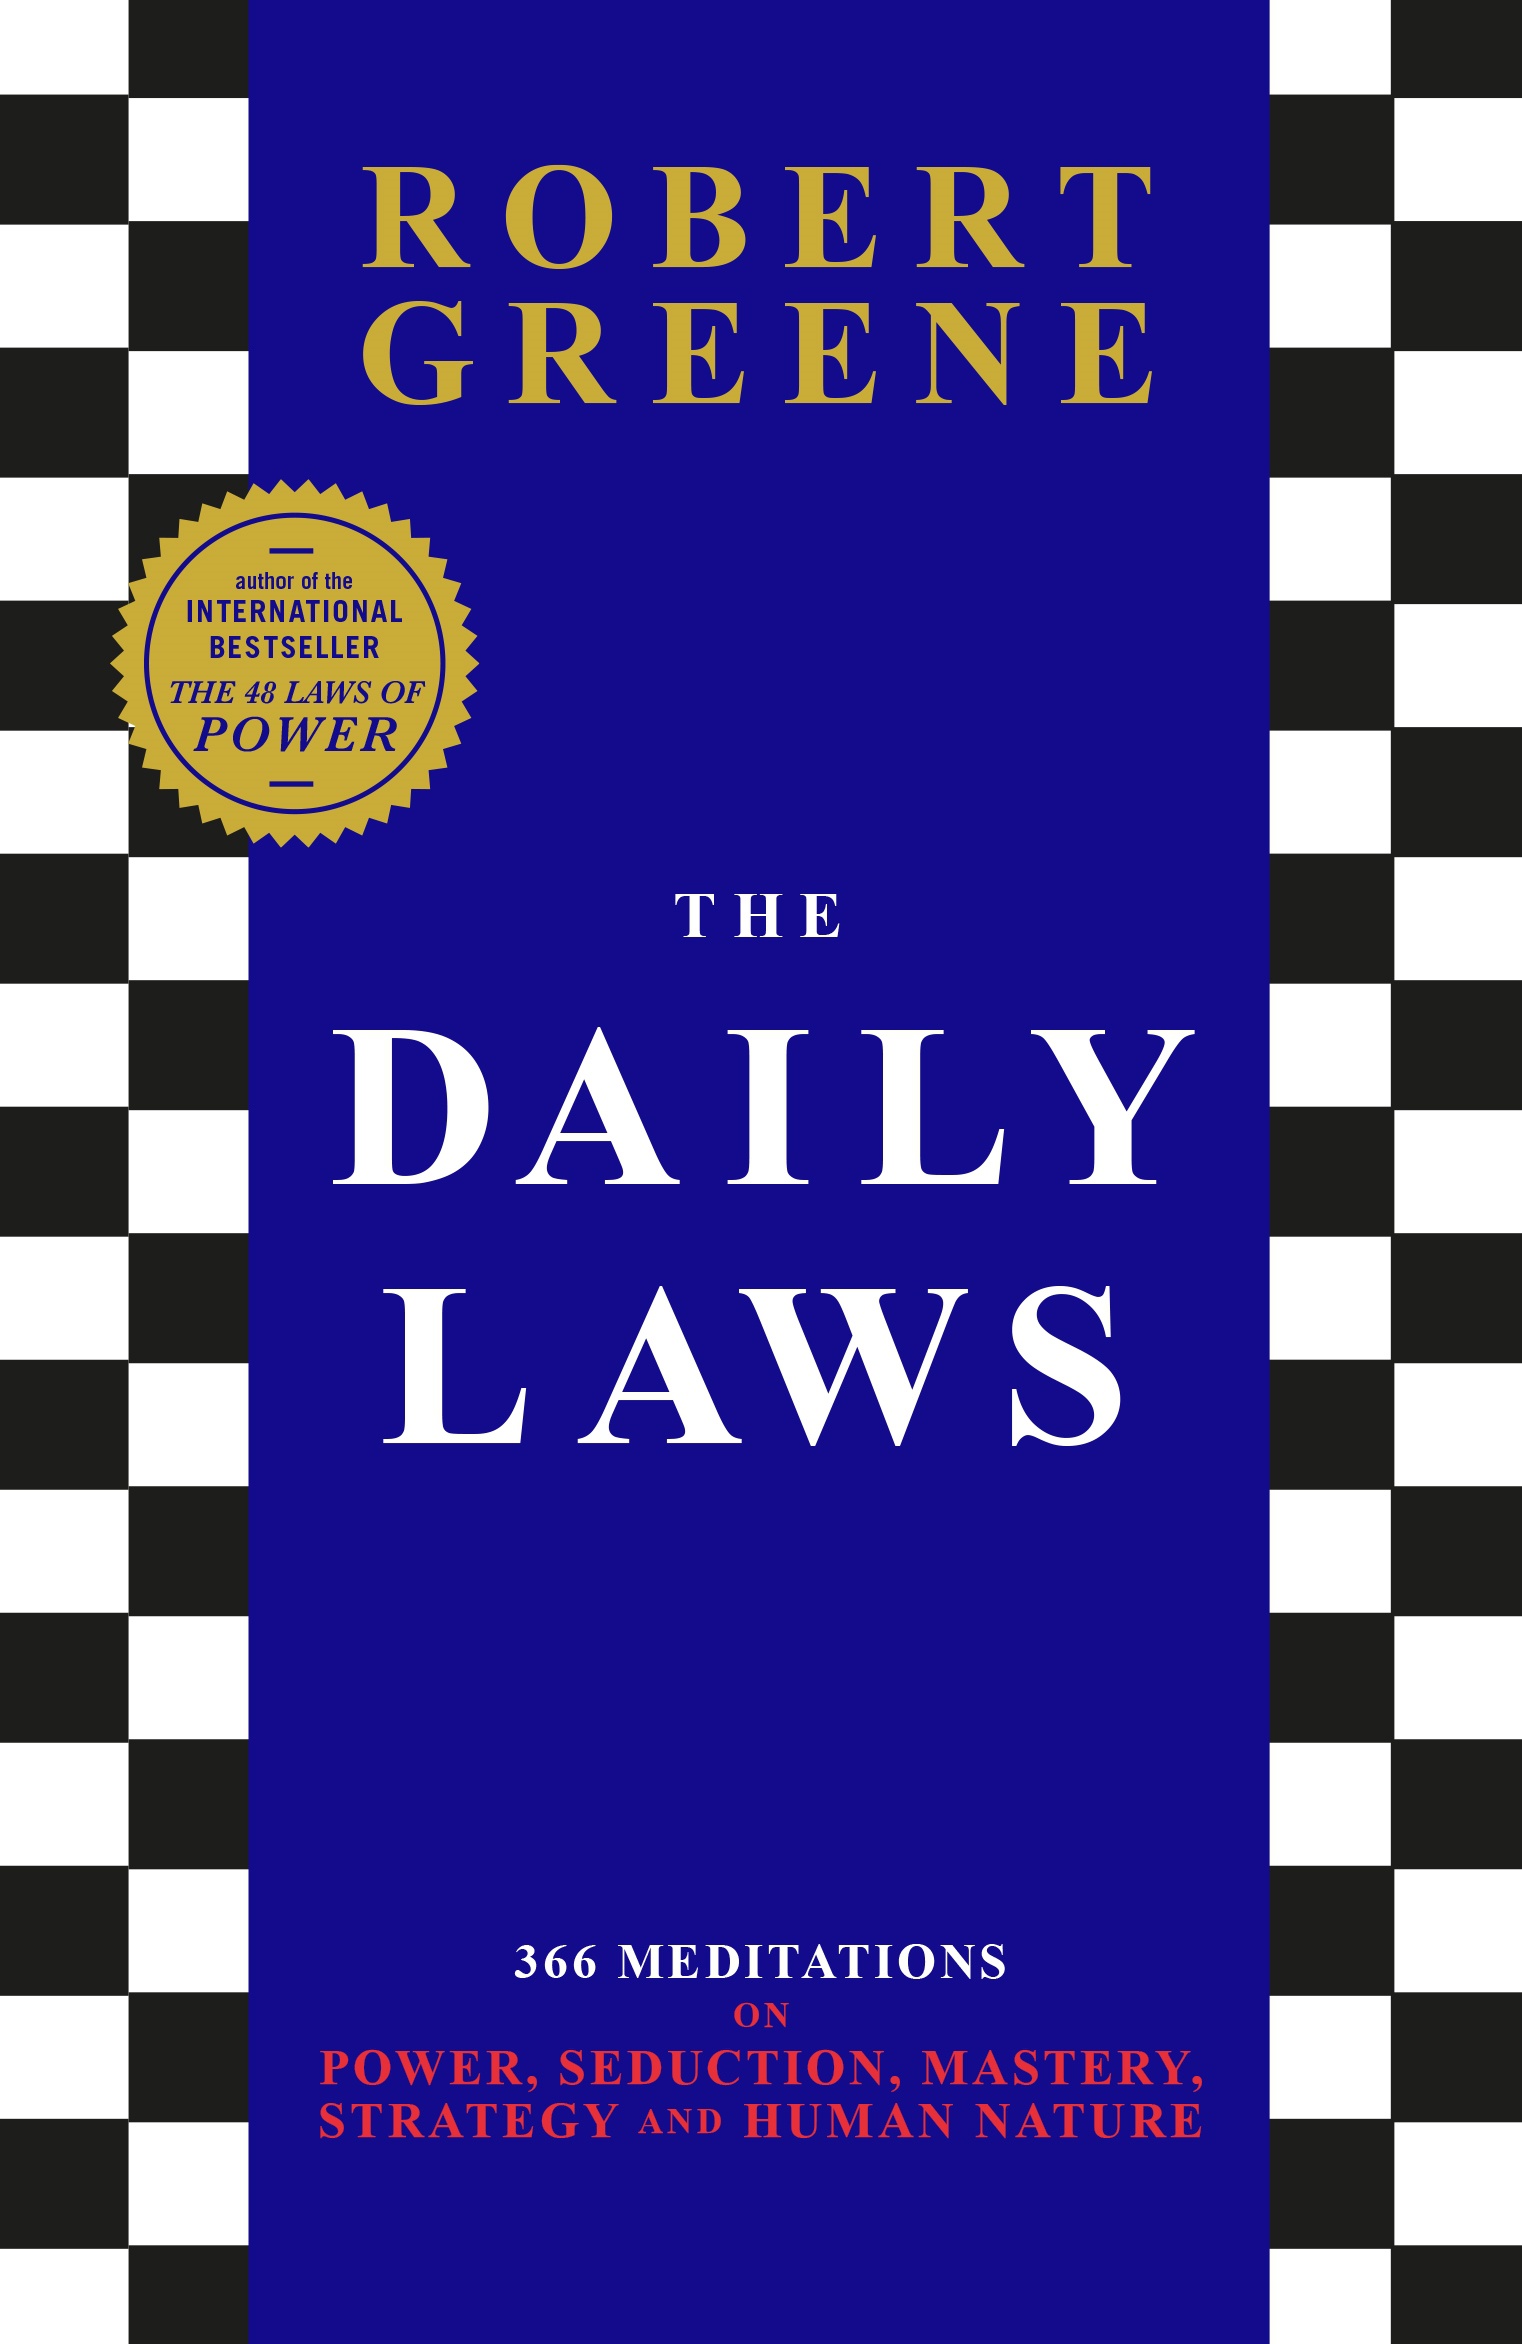 THE DAILY LAWS : 366 MEDITATIONS ON POWER, SEDUCTION, MASTERY, STRATEGY AND HUMAN NATURE